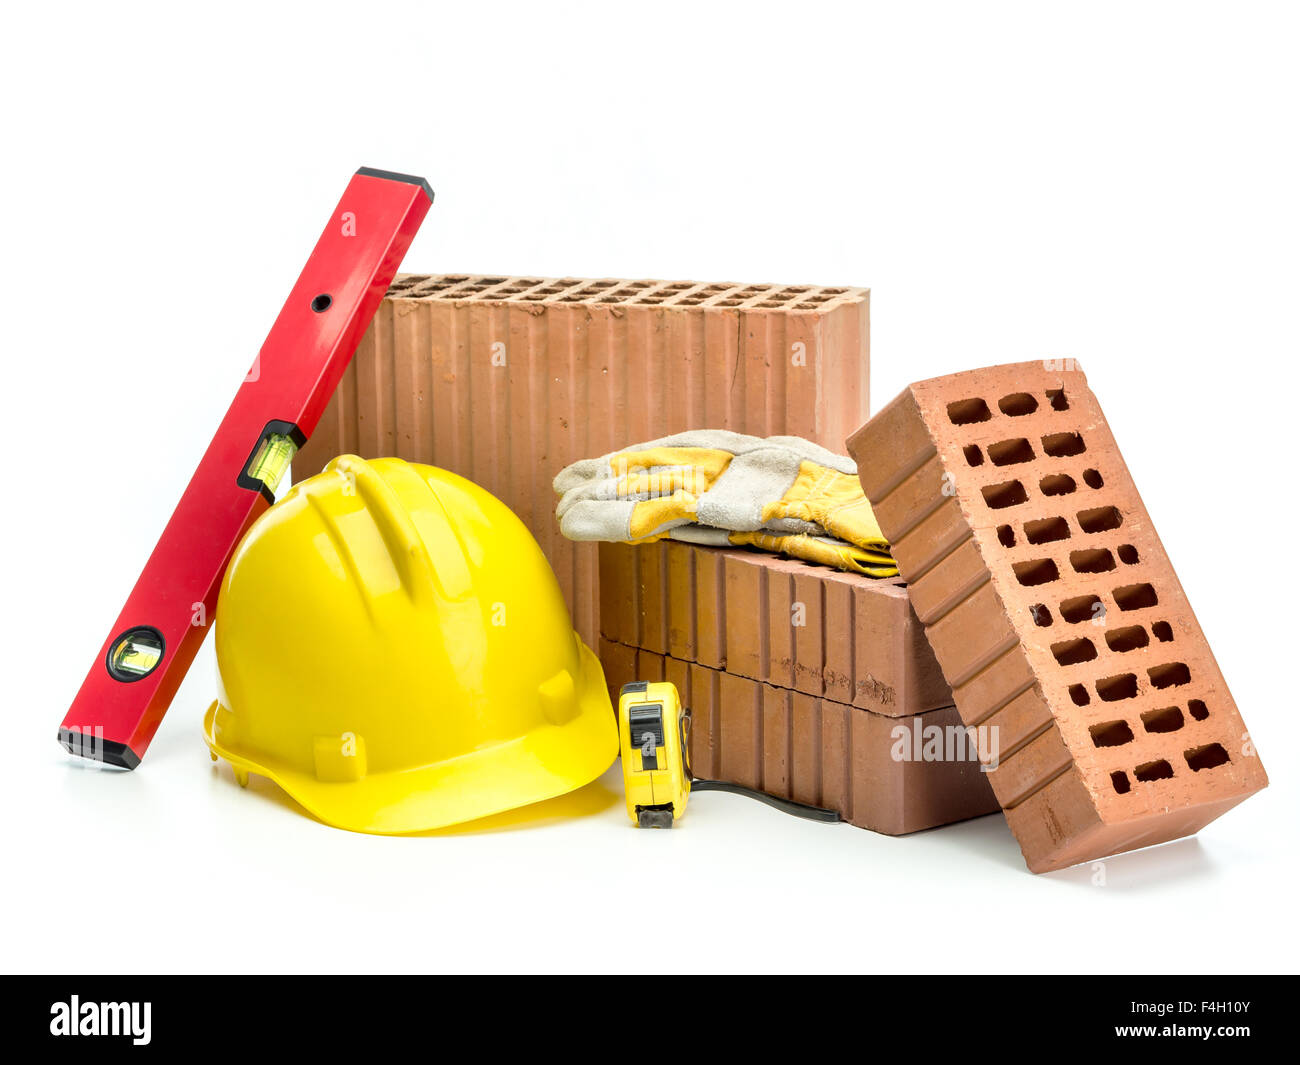 Perforated bricks, yellow helmet, protective gloves and spirit level isolated on white Stock Photo